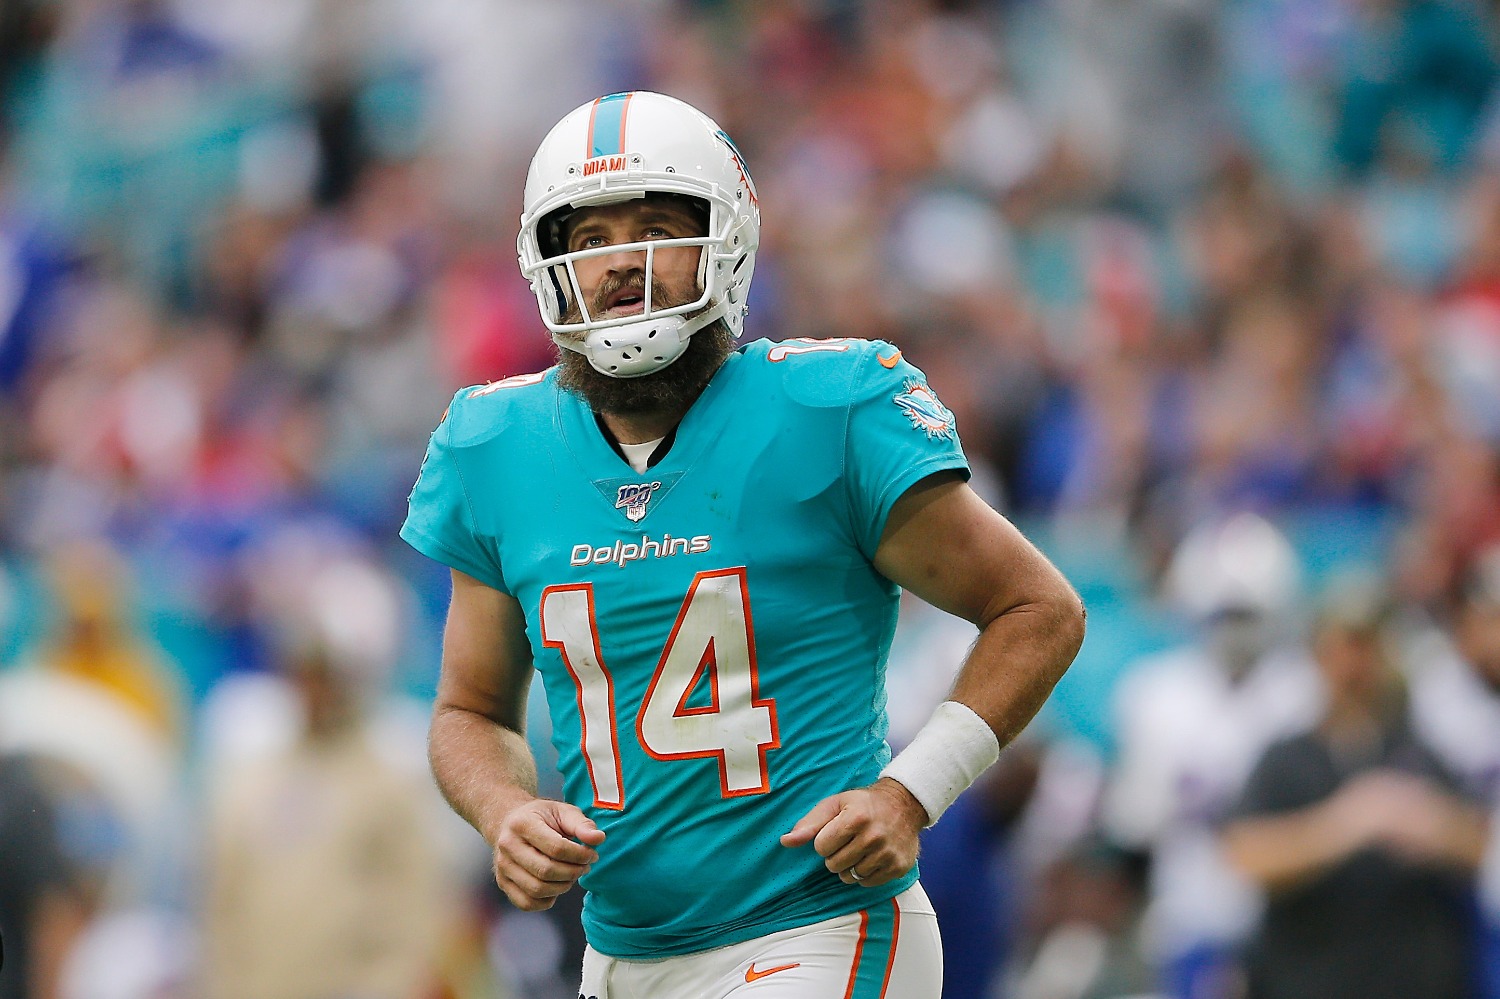 Miami Dolphins quarterback Ryan Fitzpatrick missed Saturday's scrimmage after suffering a tragic loss with his mom's untimely death.